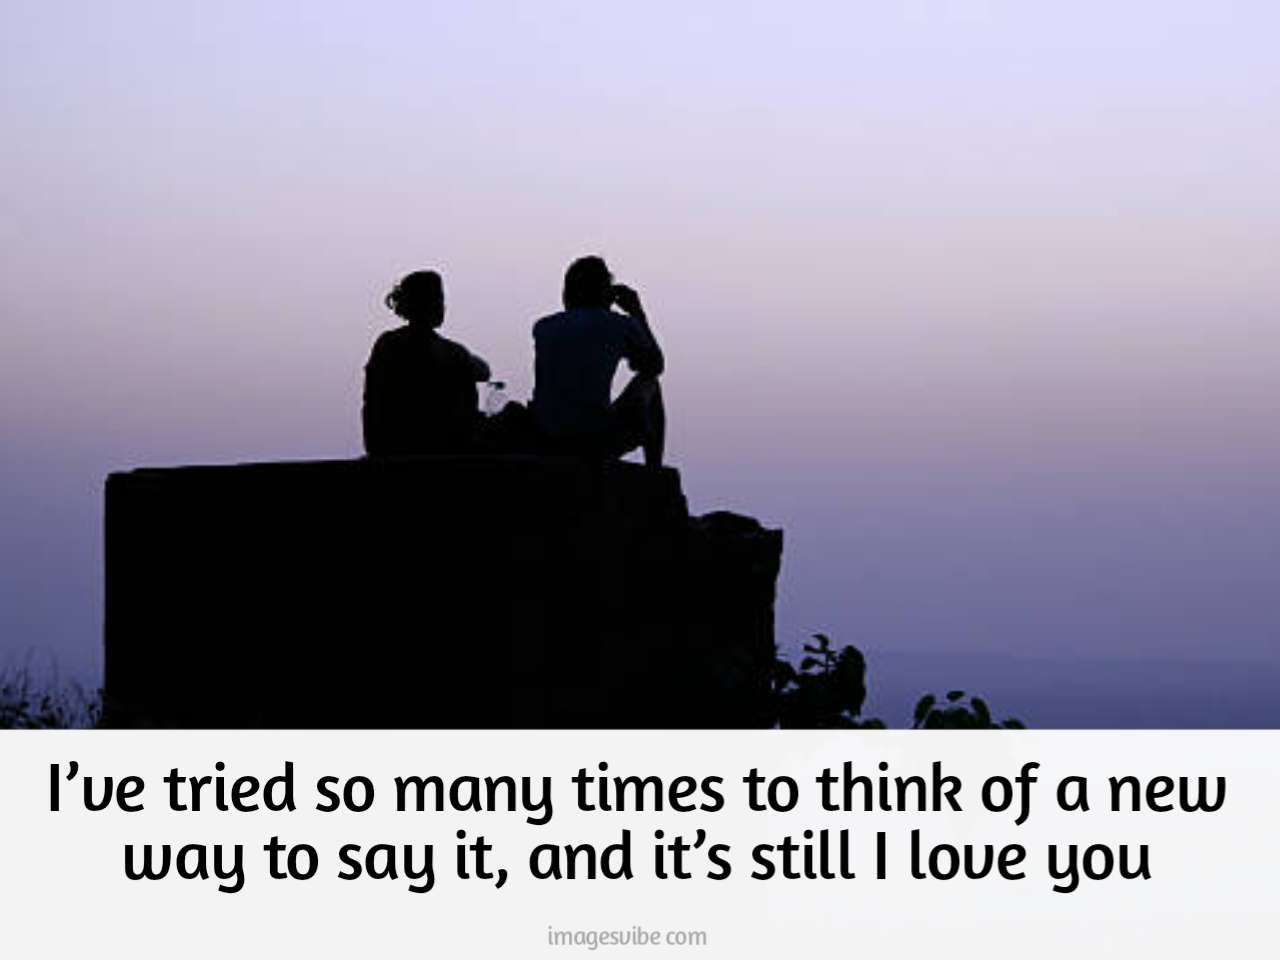 Romantic Images With Quotes17 